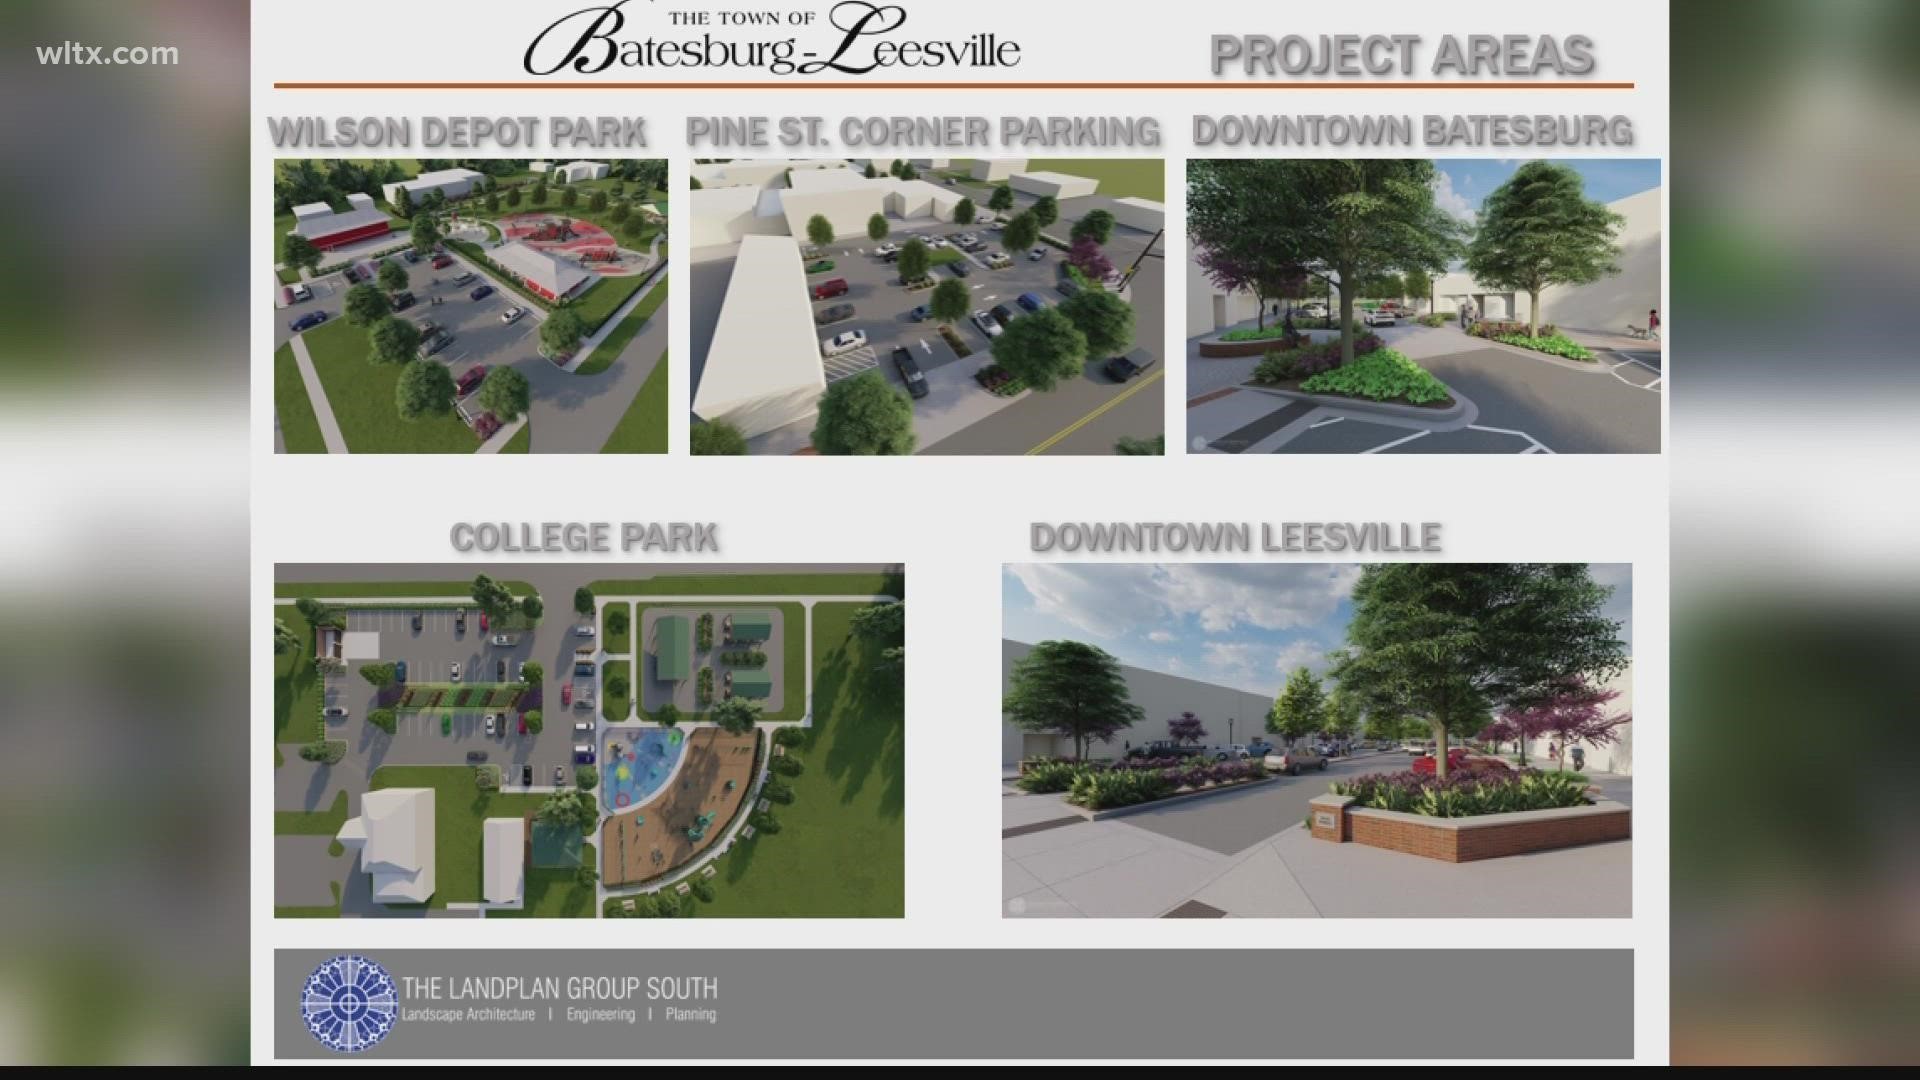 The business districts of downtown Batesburg-Leesville and two local parks will be getting a makeover.